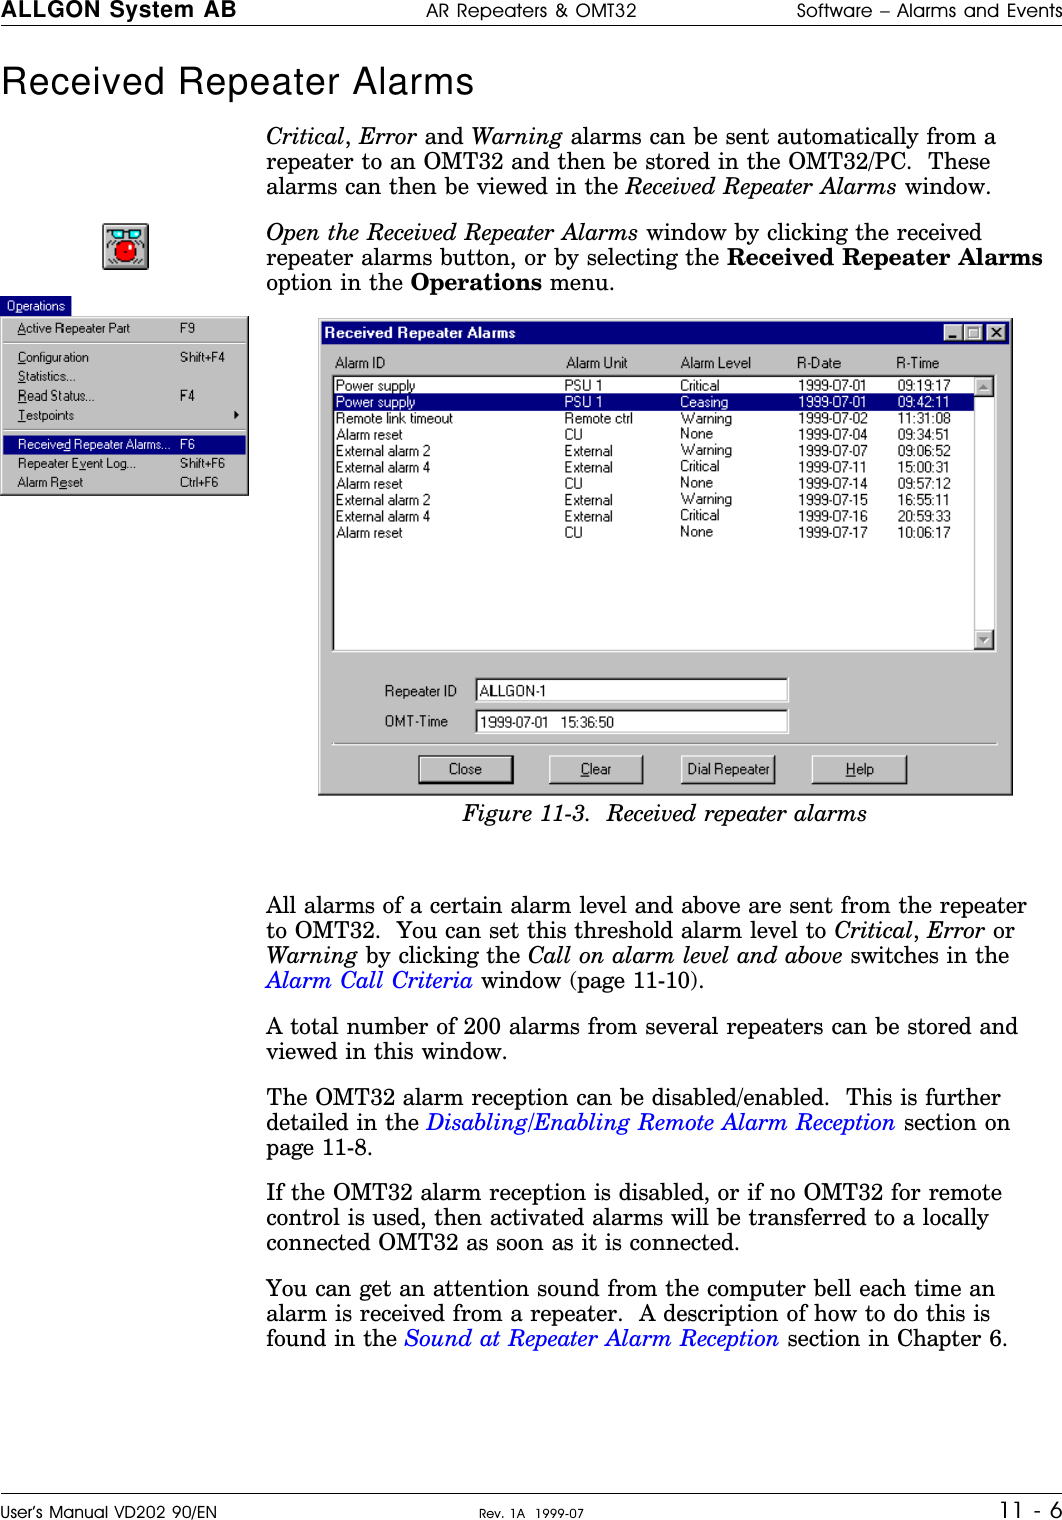 Received Repeater Alarms  Critical, Error and Warning alarms can be sent automatically from arepeater to an OMT32 and then be stored in the OMT32/PC.  Thesealarms can then be viewed in the Received Repeater Alarms window.Open the Received Repeater Alarms window by clicking the receivedrepeater alarms button, or by selecting the Received Repeater Alarmsoption in the Operations menu.All alarms of a certain alarm level and above are sent from the repeaterto OMT32.  You can set this threshold alarm level to Critical, Error orWarning by clicking the Call on alarm level and above switches in theAlarm Call Criteria window (page 11-10).A total number of 200 alarms from several repeaters can be stored andviewed in this window.The OMT32 alarm reception can be disabled/enabled.  This is furtherdetailed in the Disabling/Enabling Remote Alarm Reception section onpage 11-8.If the OMT32 alarm reception is disabled, or if no OMT32 for remotecontrol is used, then activated alarms will be transferred to a locallyconnected OMT32 as soon as it is connected.You can get an attention sound from the computer bell each time analarm is received from a repeater.  A description of how to do this isfound in the Sound at Repeater Alarm Reception section in Chapter 6.Figure 11-3.  Received repeater alarmsALLGON System AB AR Repeaters &amp; OMT32 Software – Alarms and EventsUser’s Manual VD202 90/EN Rev. 1A  1999-07 11 - 6